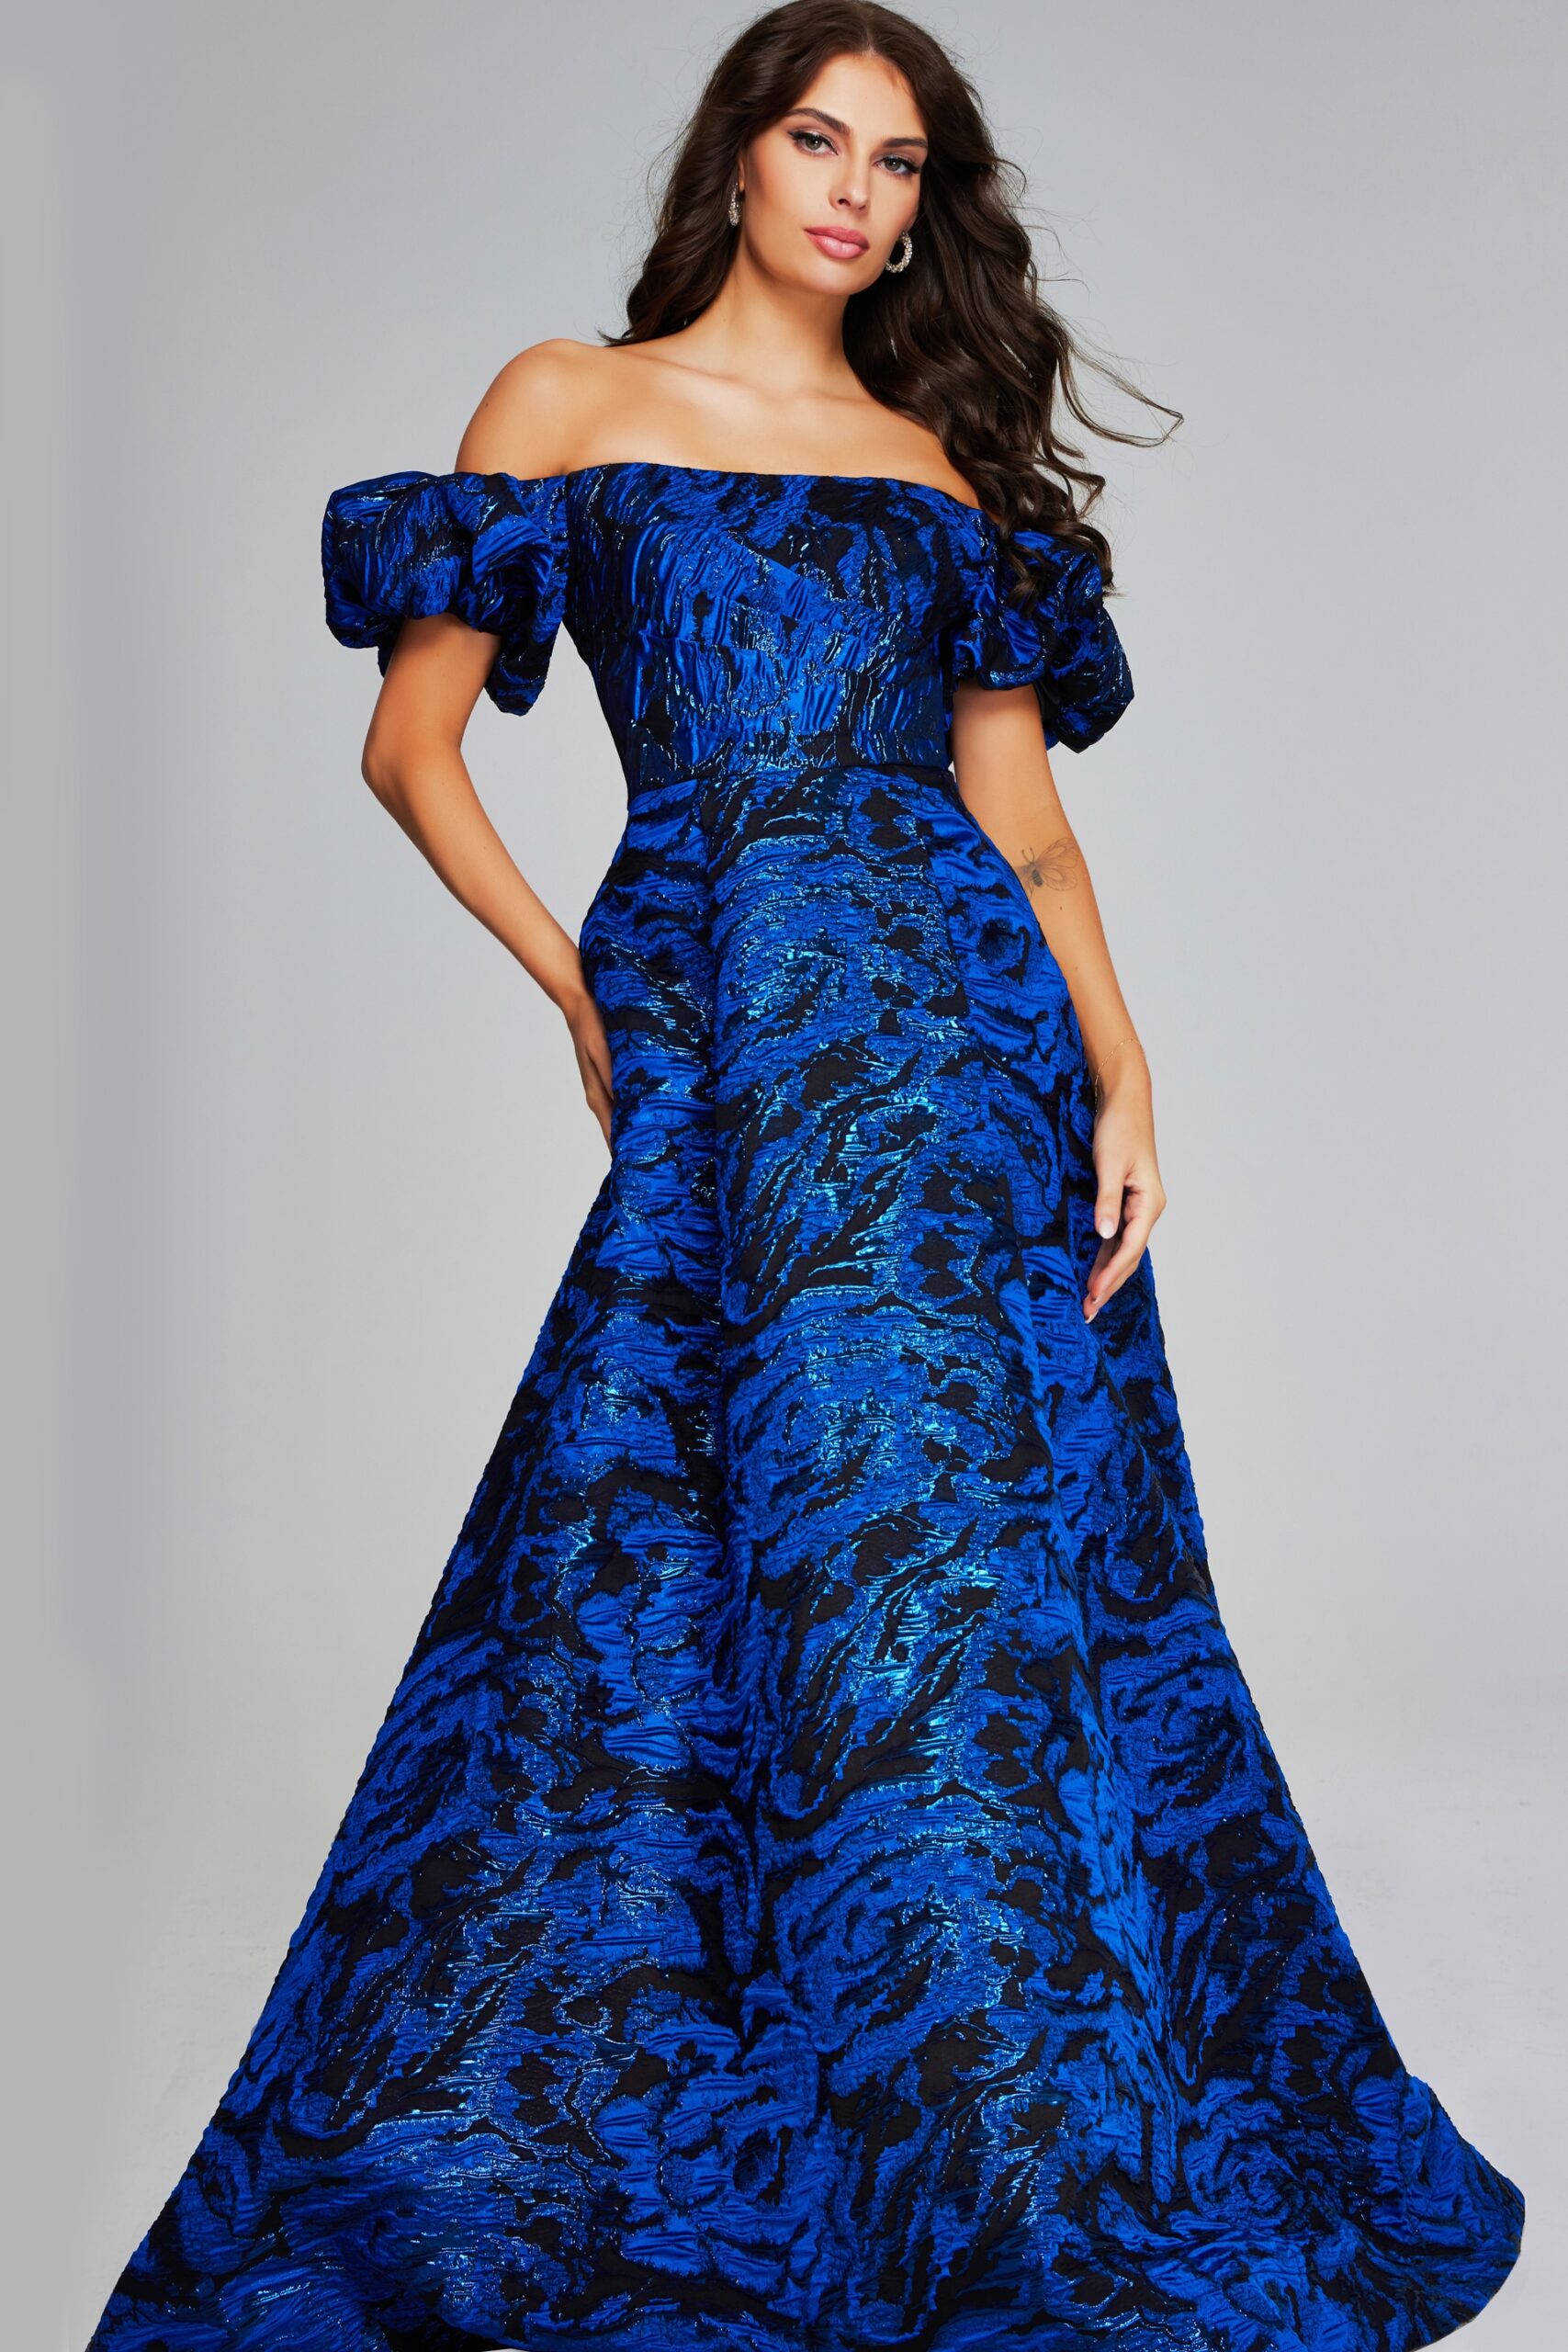 Striking Royal Blue and Black Off-Shoulder Gown with Puff Sleeves 40315